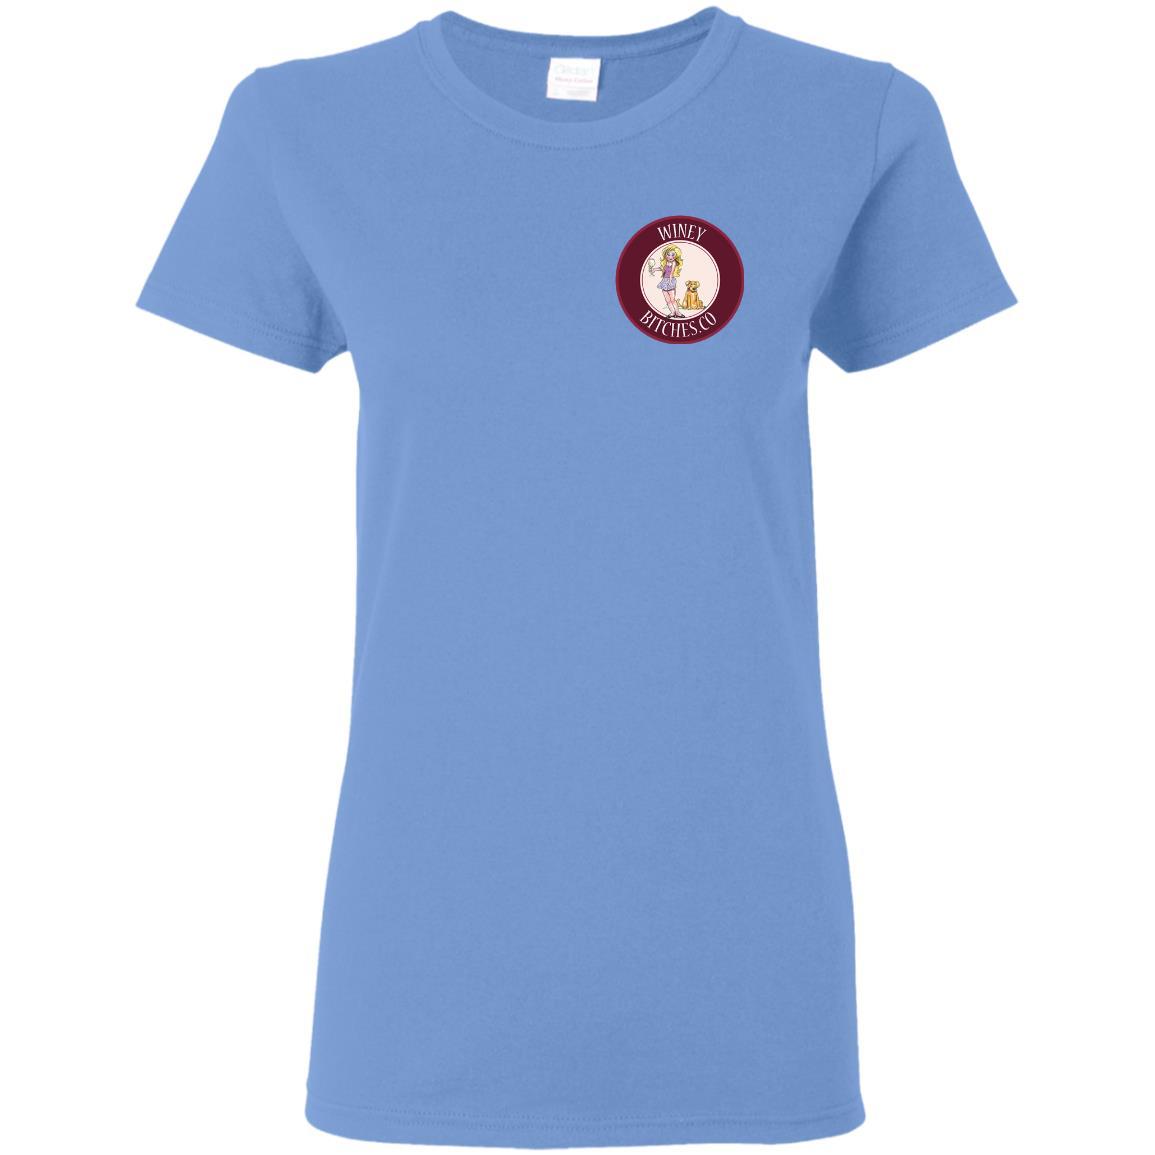 T-Shirts Carolina Blue / S WineyBitches.co Hilariously Funny "Count Me In" Ladies T-Shirt for Wine & Dog Lovers WineyBitchesCo